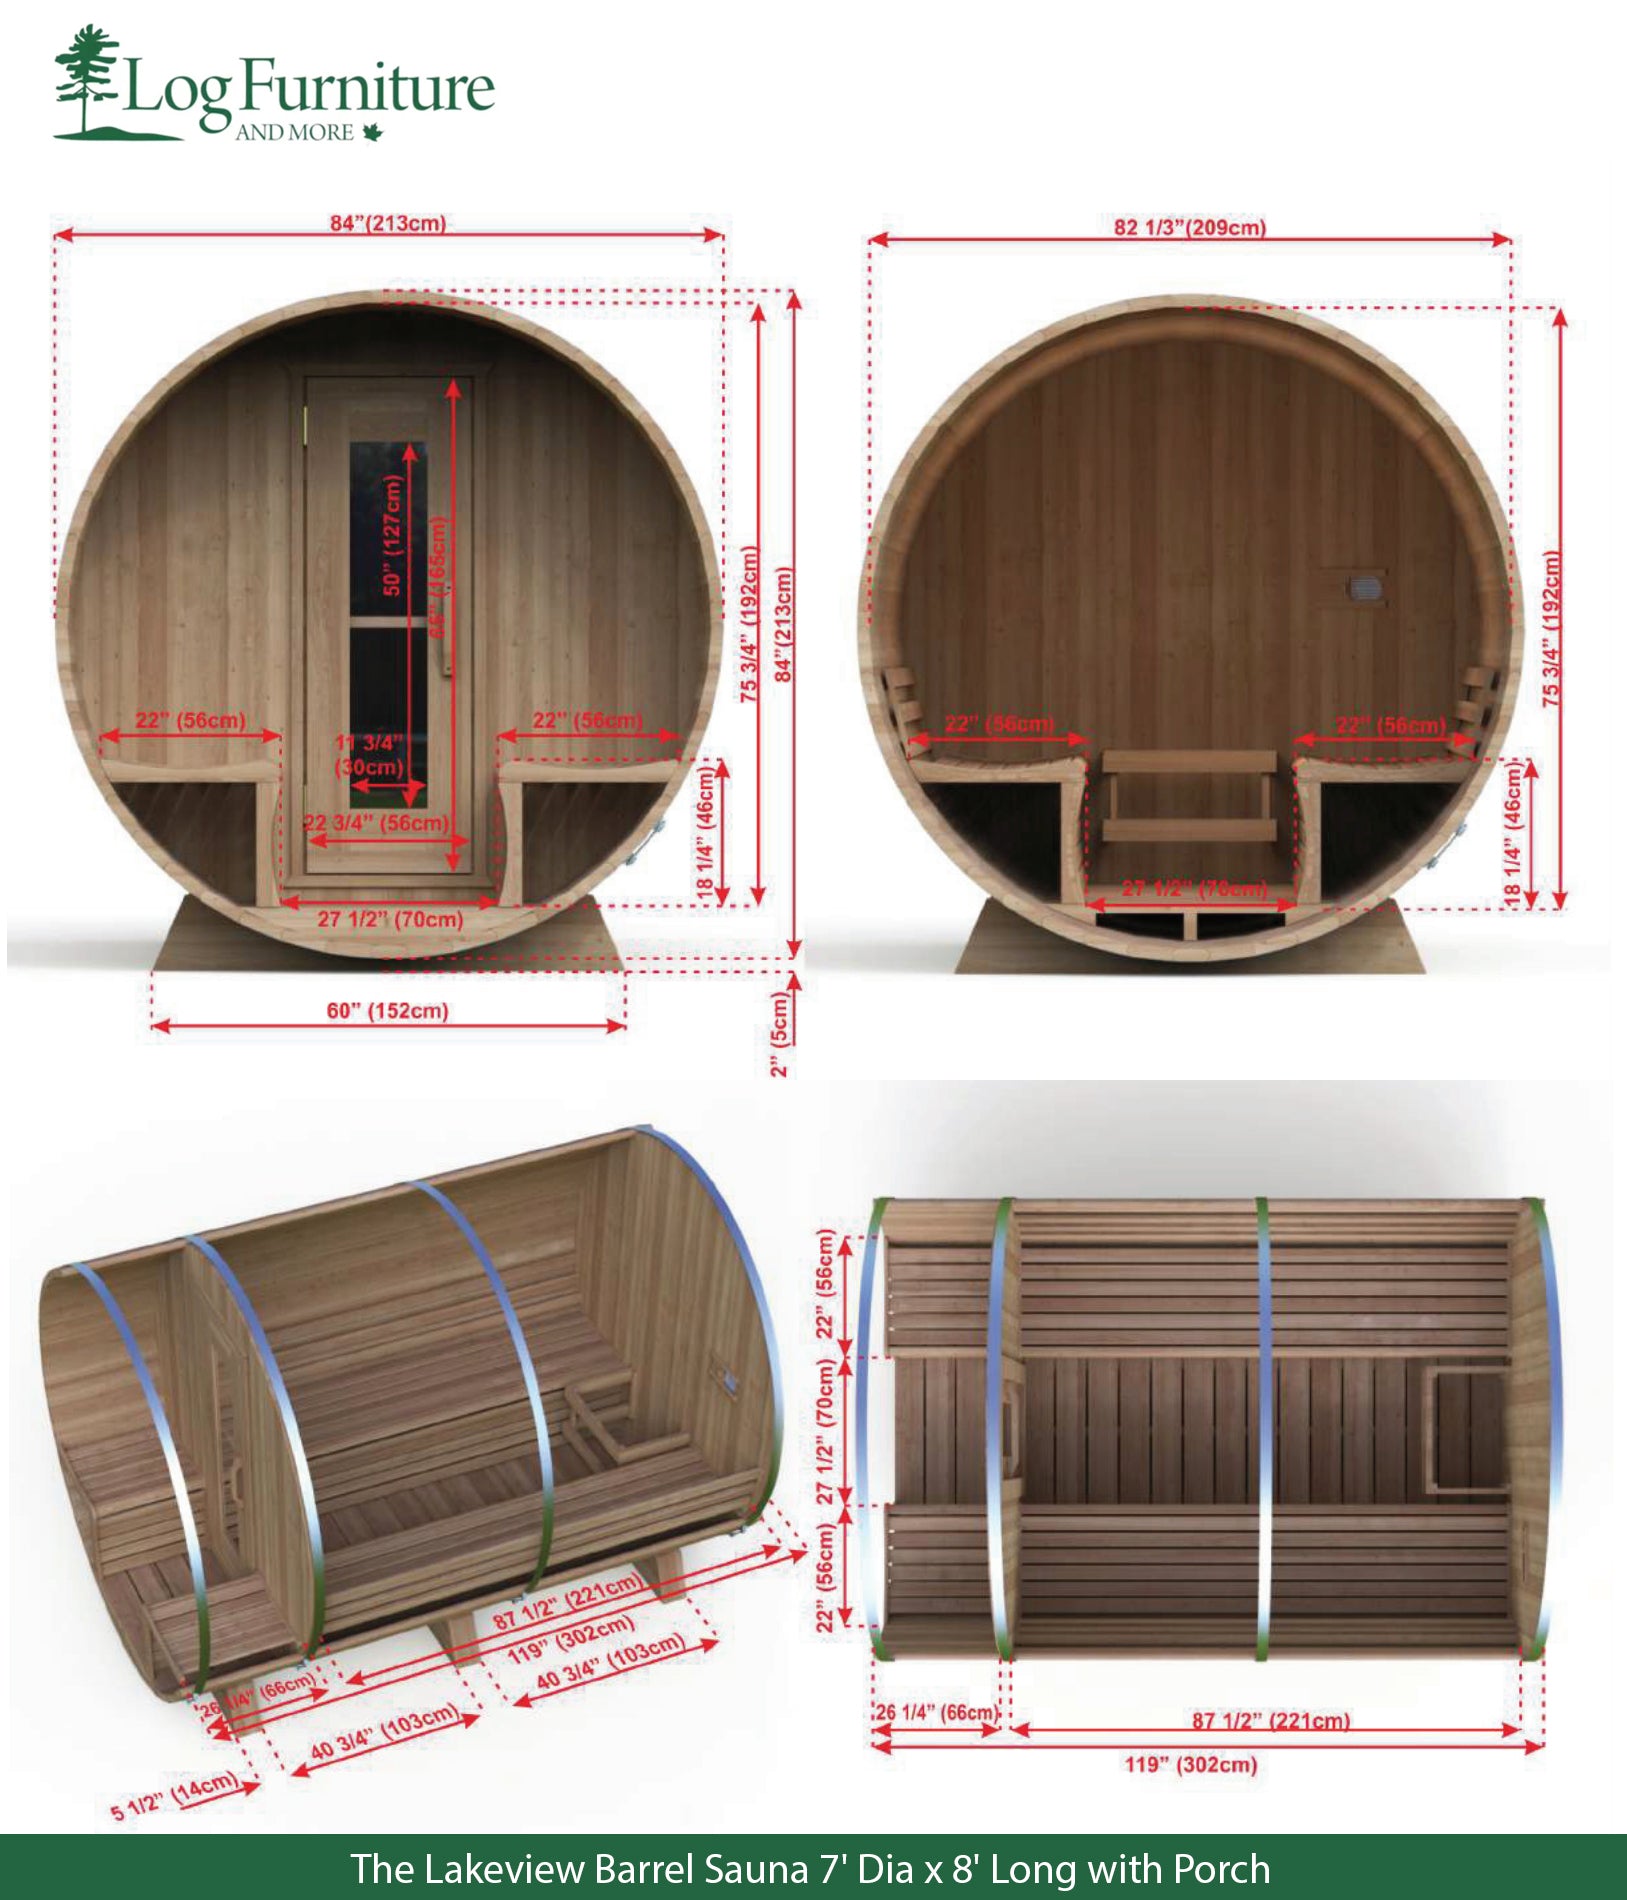 The Lakeview Barrel Sauna 7' Dia x 8' Long with Porch